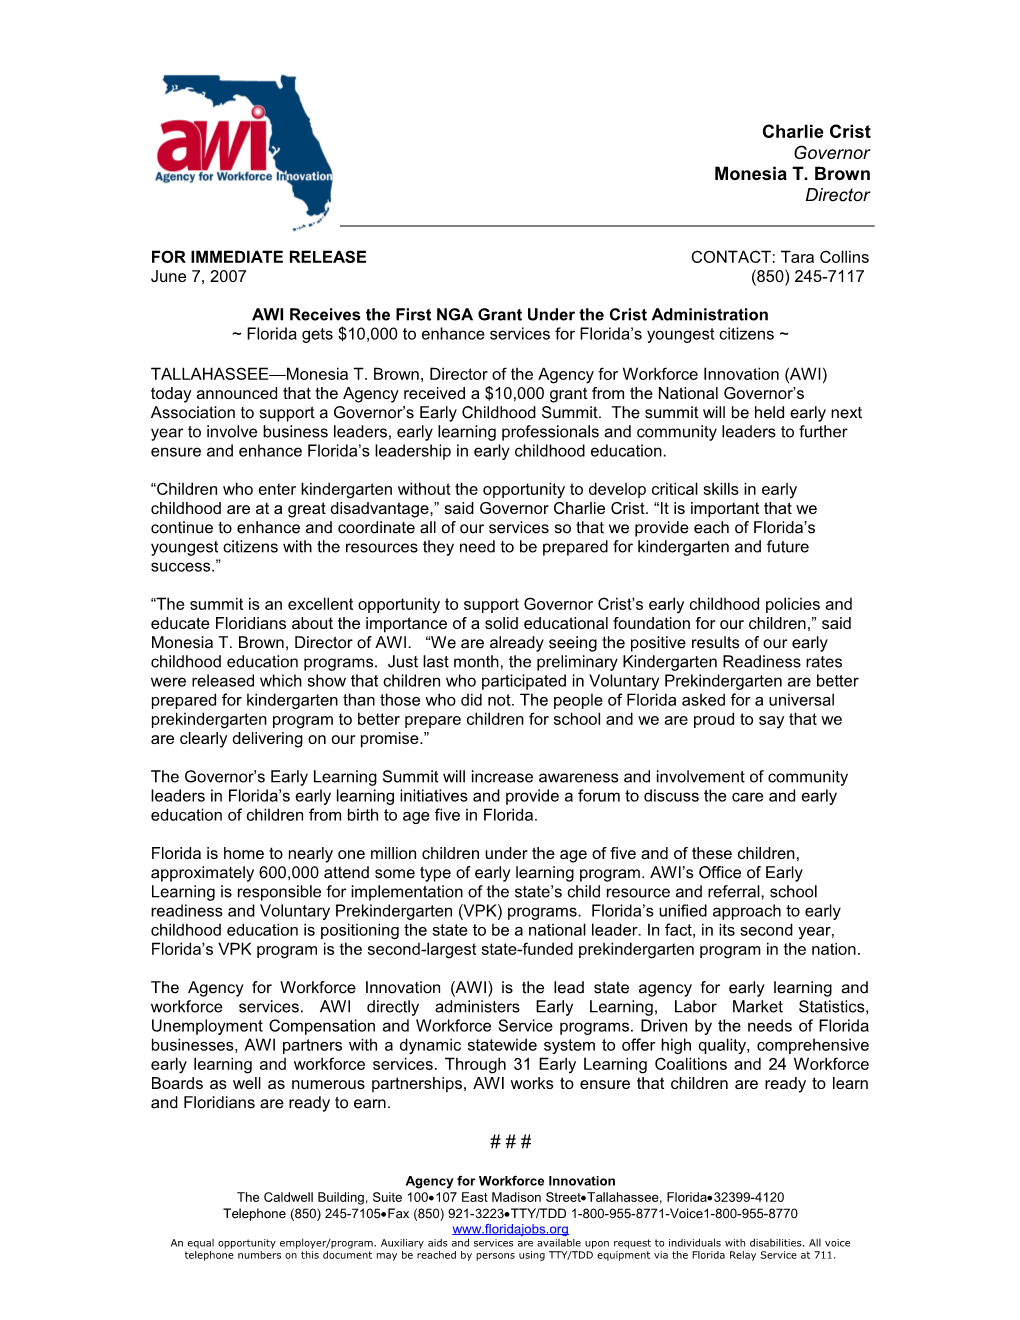 AWI Receives the First NGA Grant Under the Crist Administration